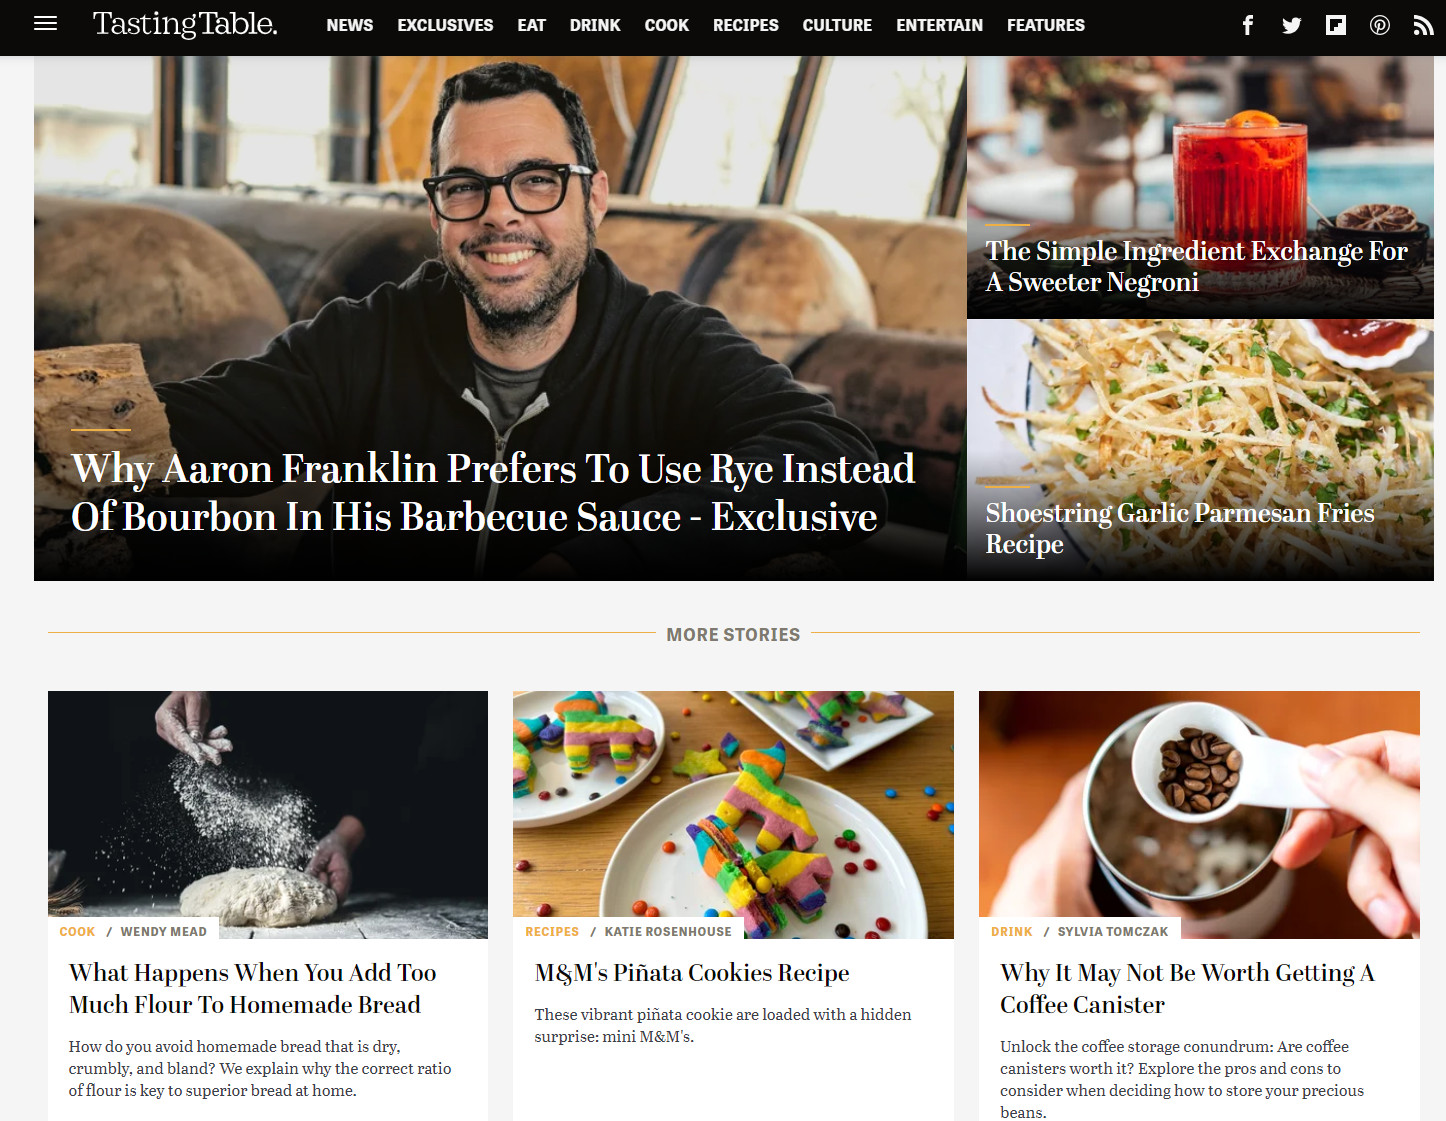 his food blog goes above and beyond by bringing readers the latest happenings in the food service industry